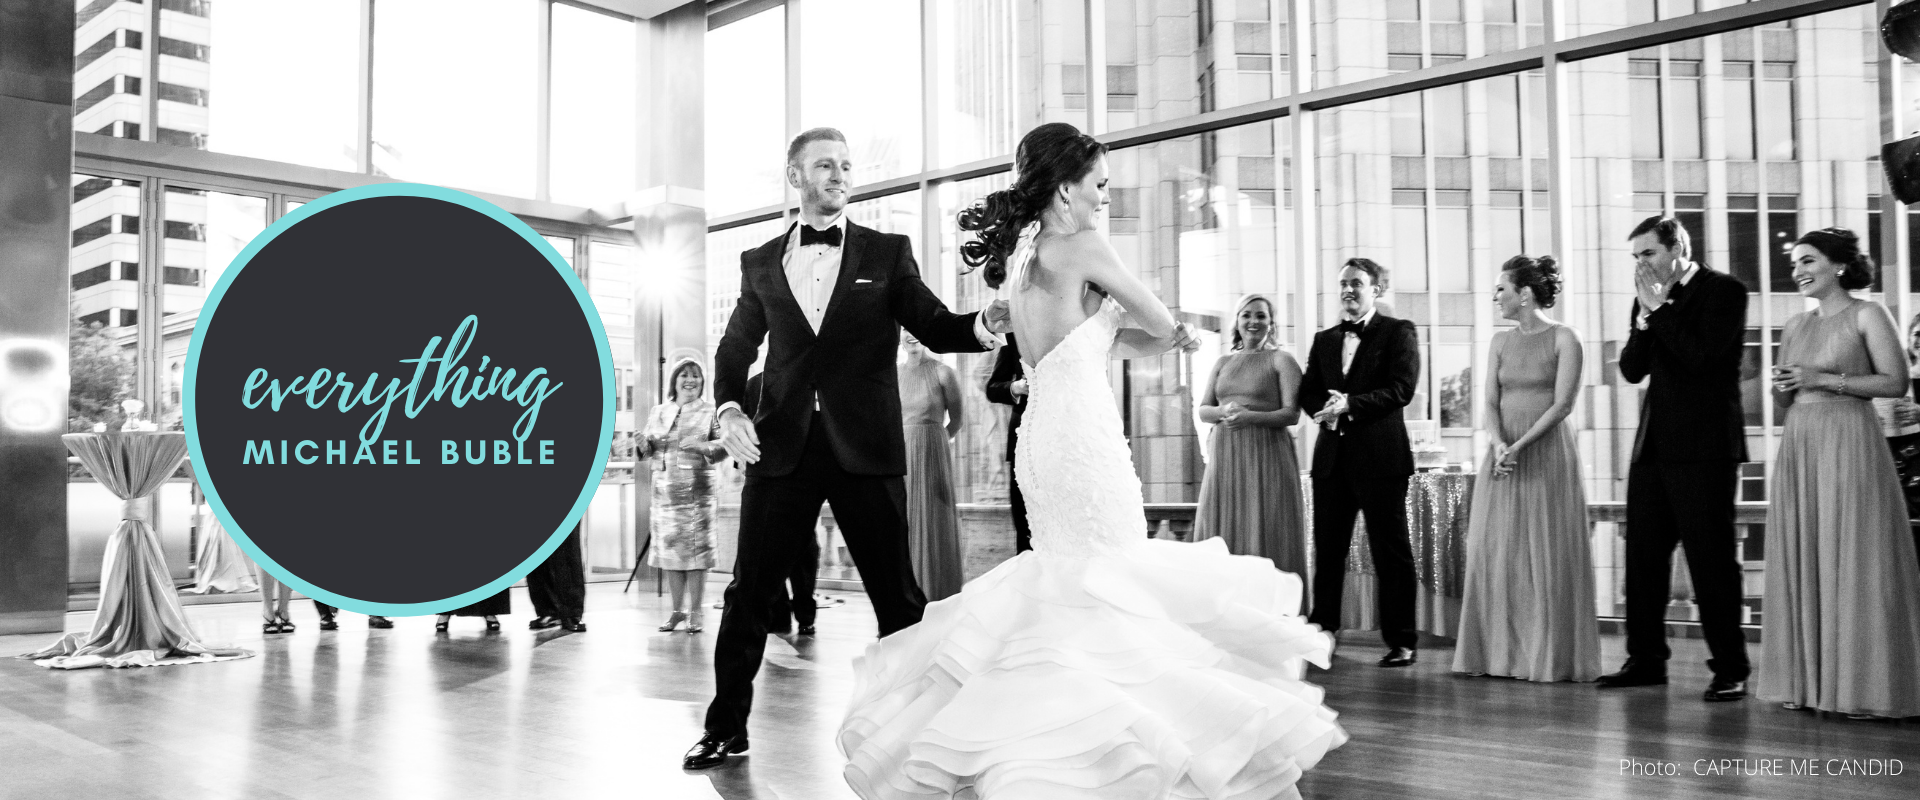 everything Michael Bublé wedding first dance choreography tutorial for beginners